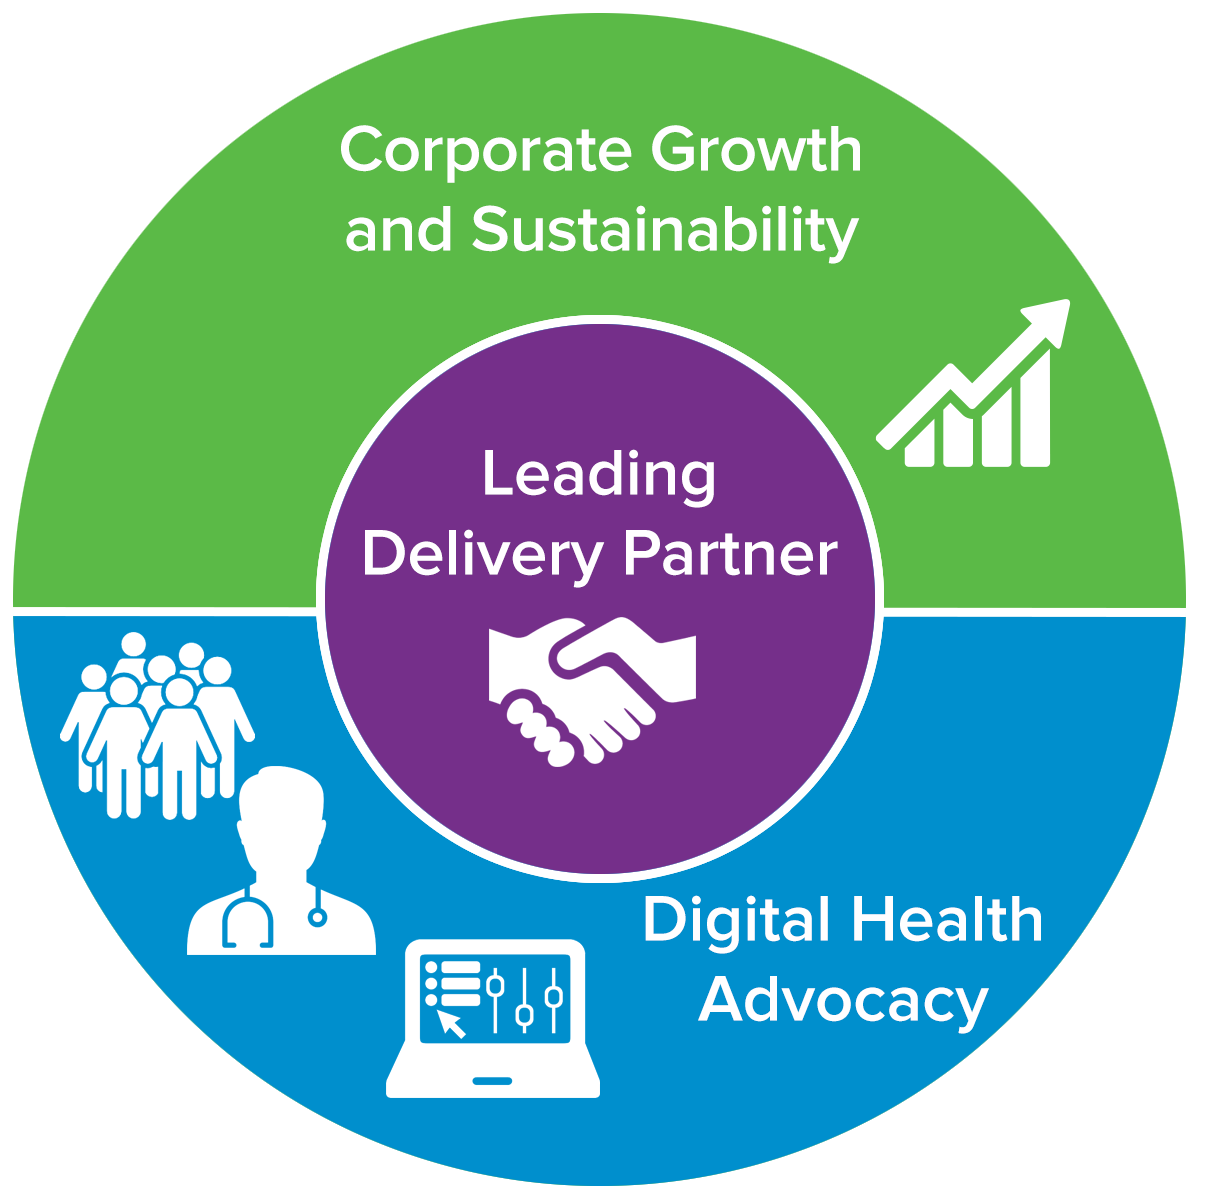 A circle divided into 3 parts with corporate growth and sustainability; leading delivery partner; and digital health advocacy 